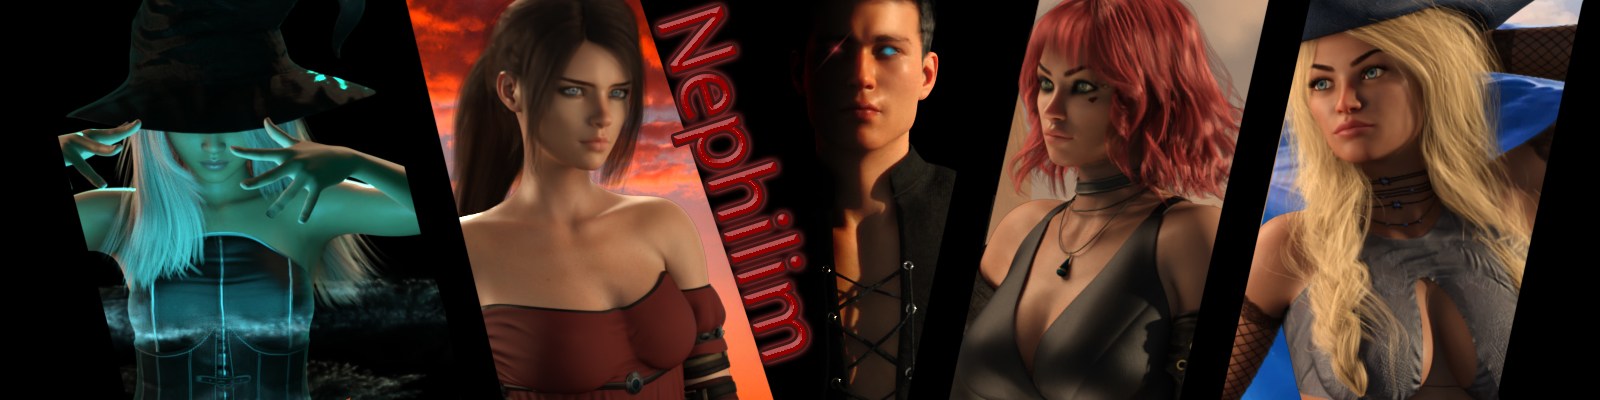 Nephilim [BuuPlays] Adult xxx Game Download